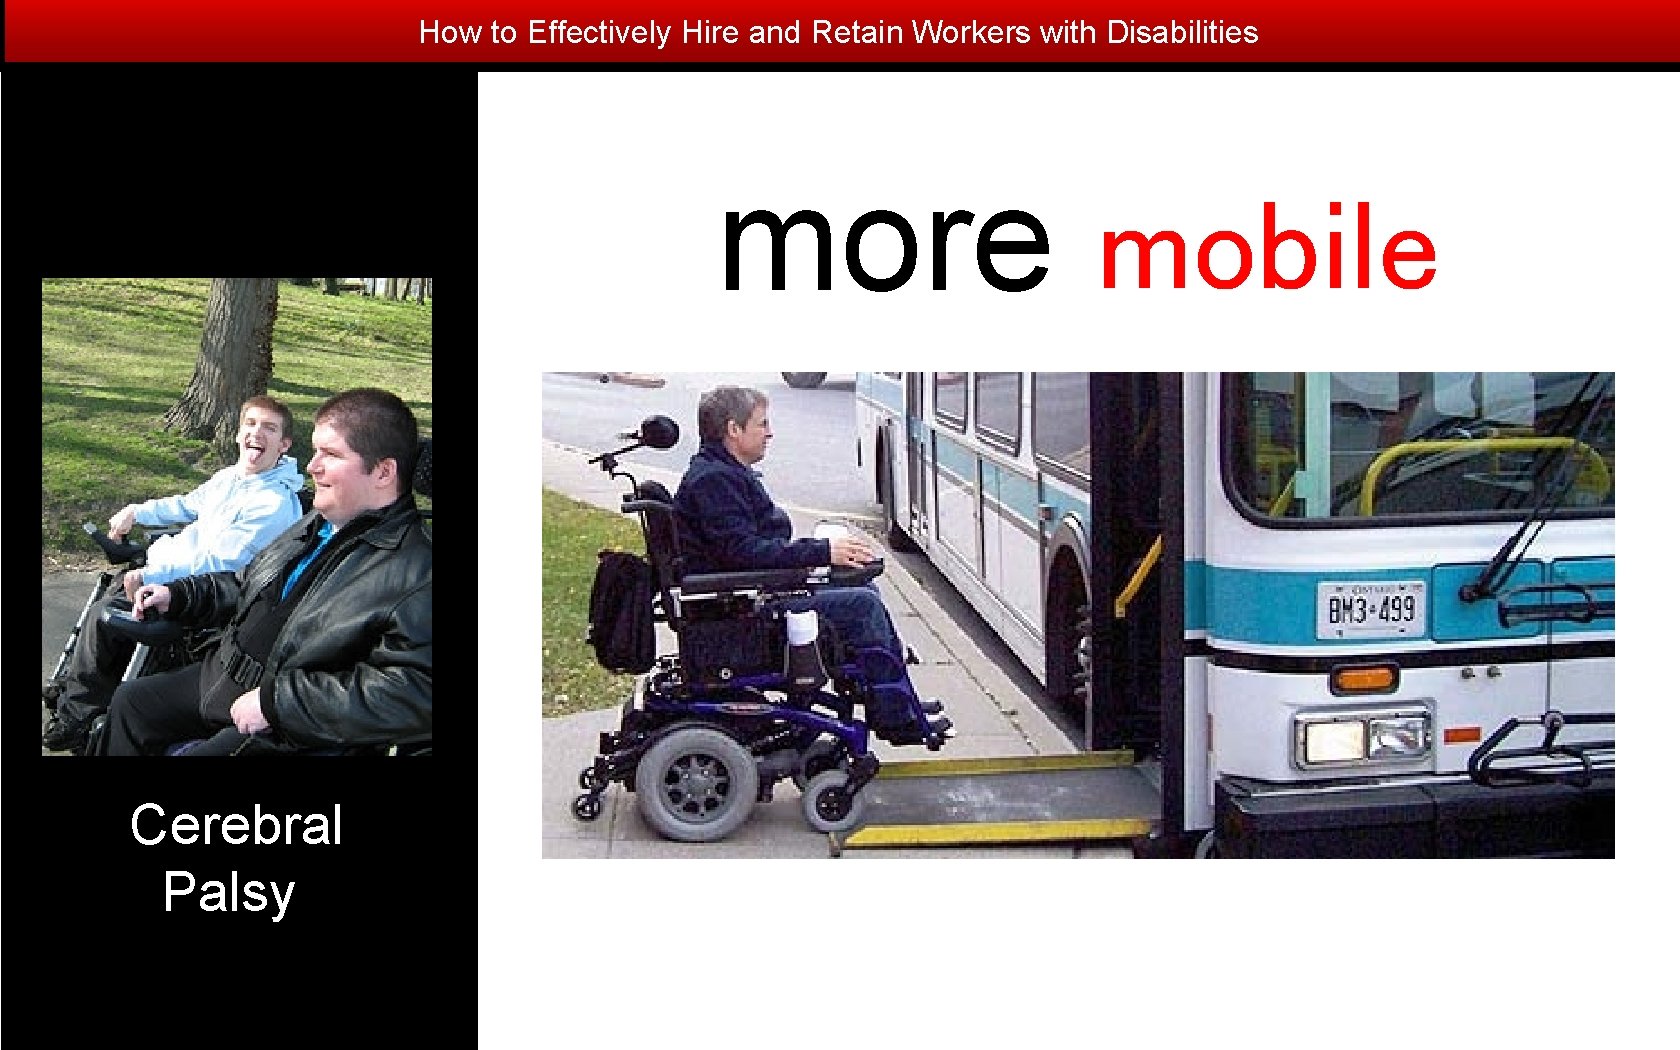 How to Effectively Hire and Retain Workers with Disabilities more mobile Cerebral Palsy 